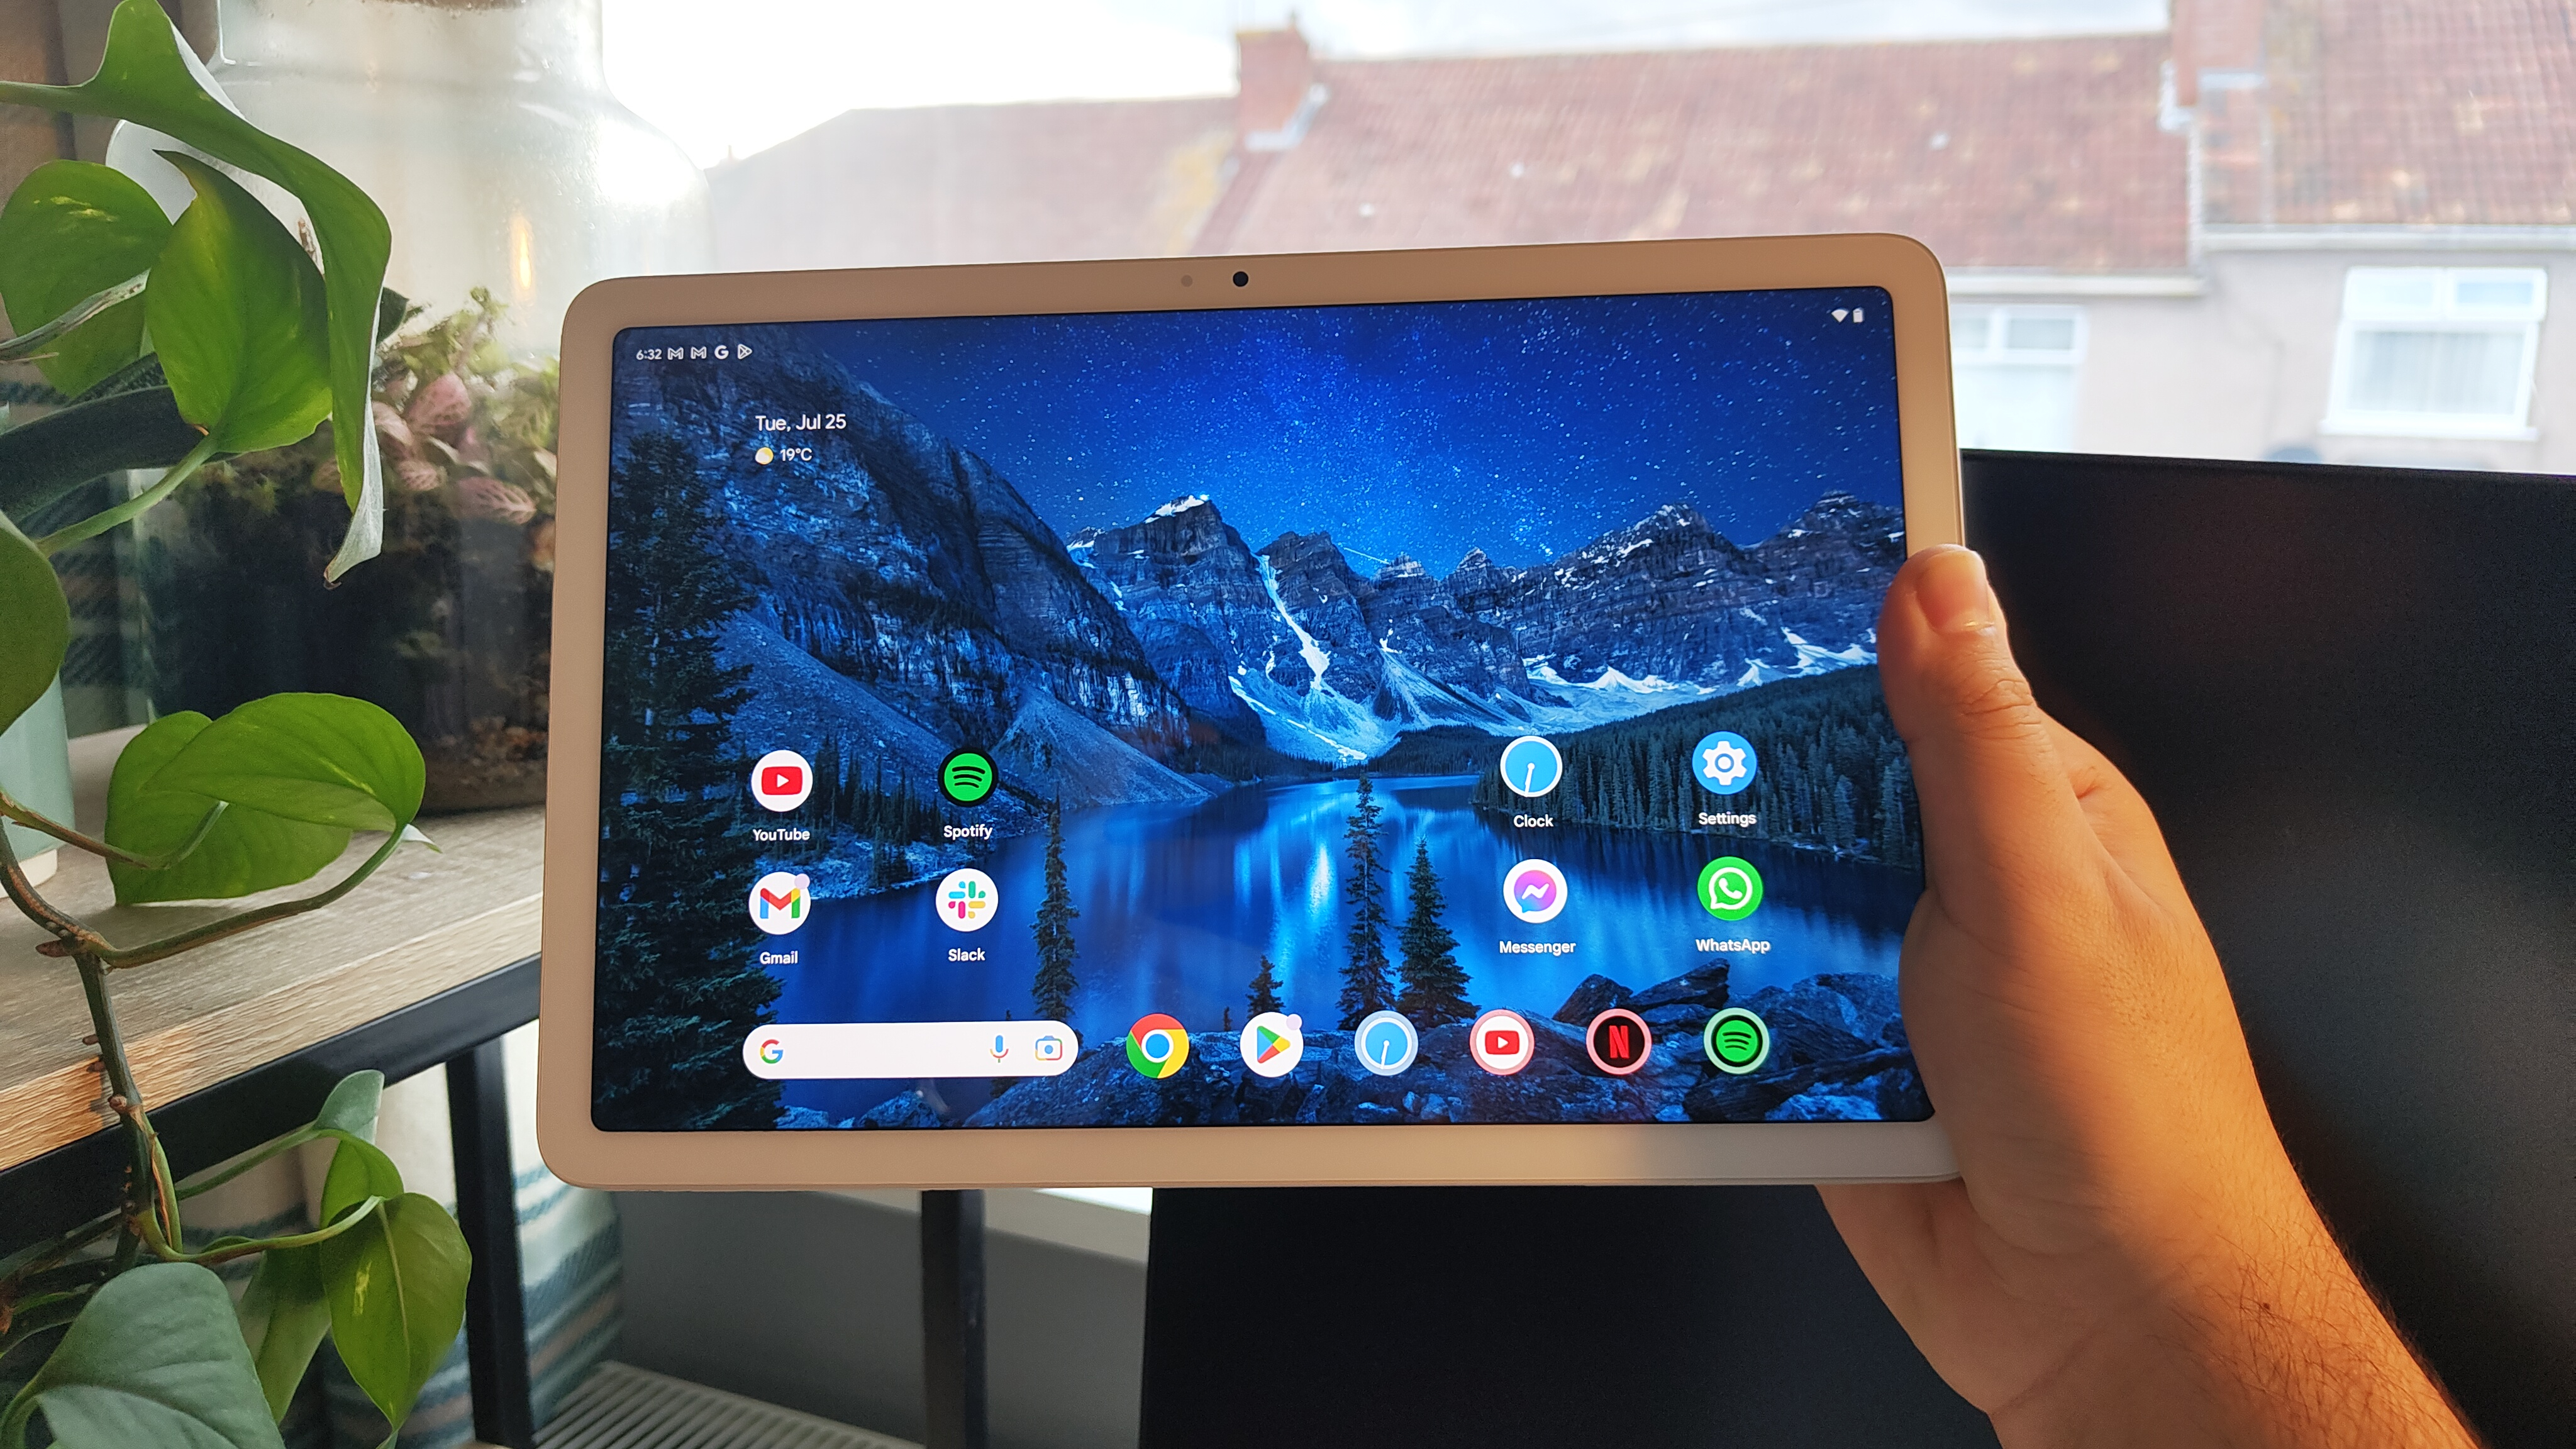 Google Pixel Tablet review: the dock makes all the difference